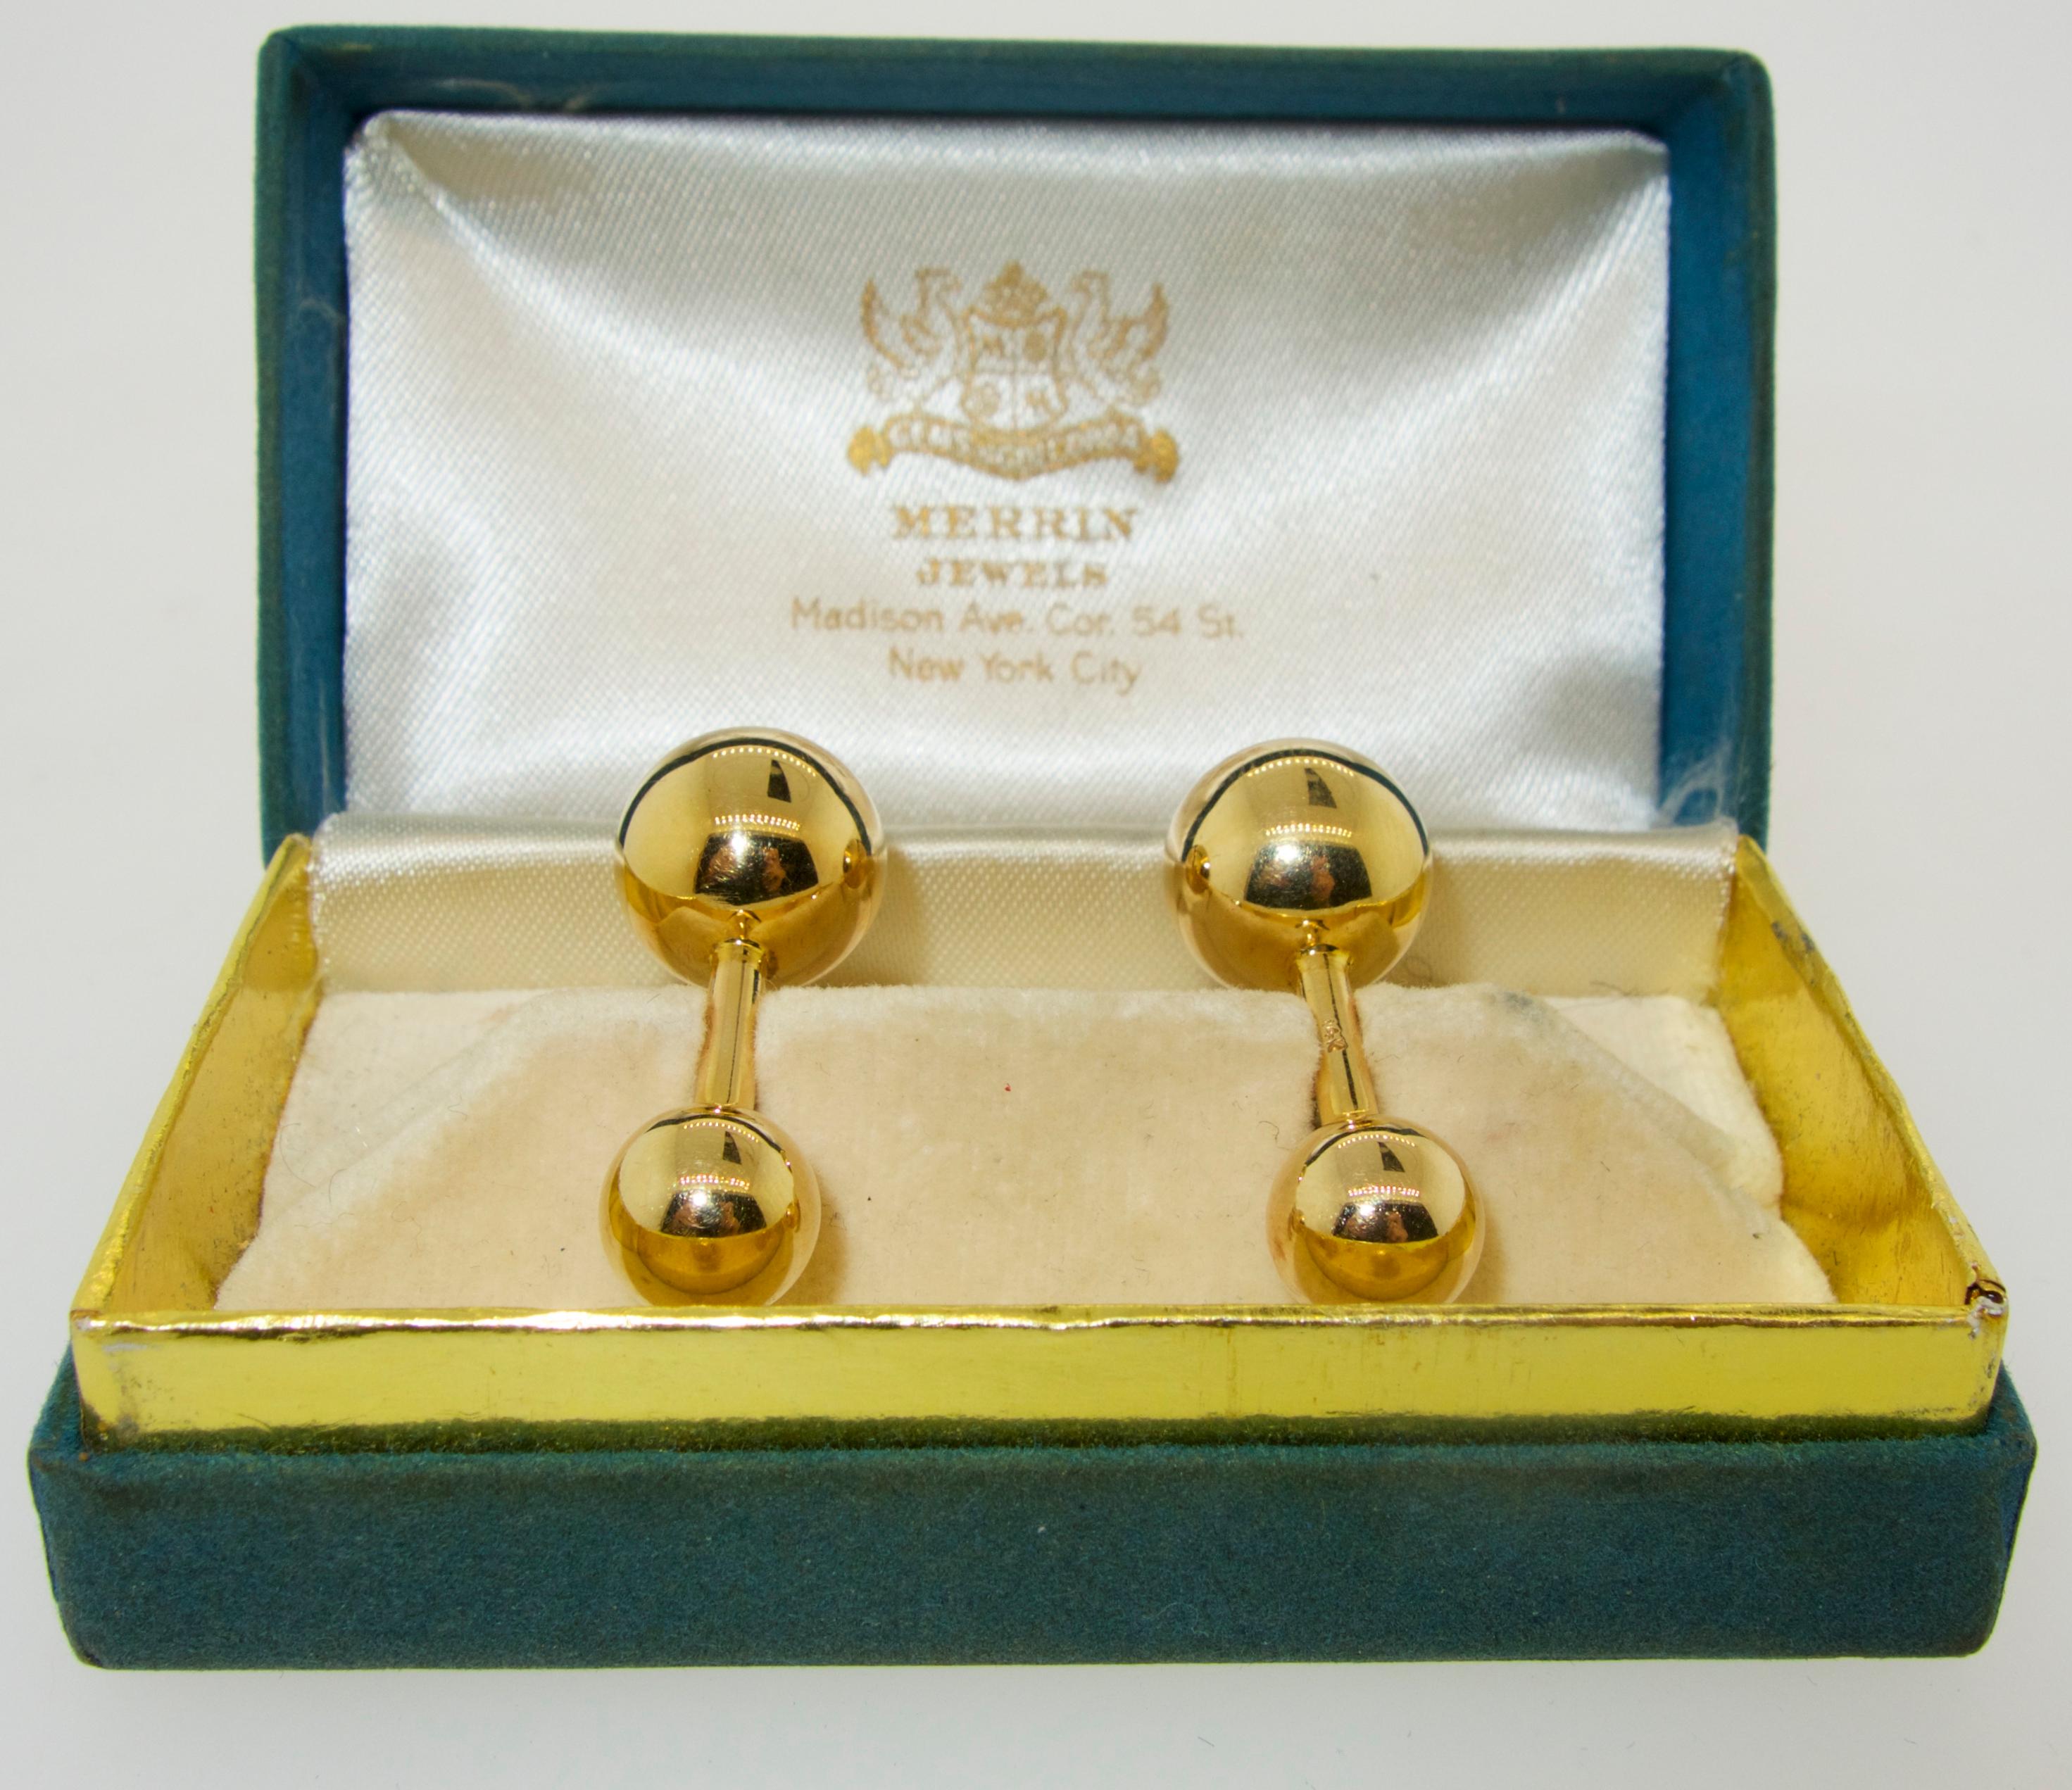 Gold cufflinks that are easy to put on and wear - classic design, these cufflinks weigh 15.2 grams, they are 14K and in fine condition.  Circa 1930 and in their original box.
